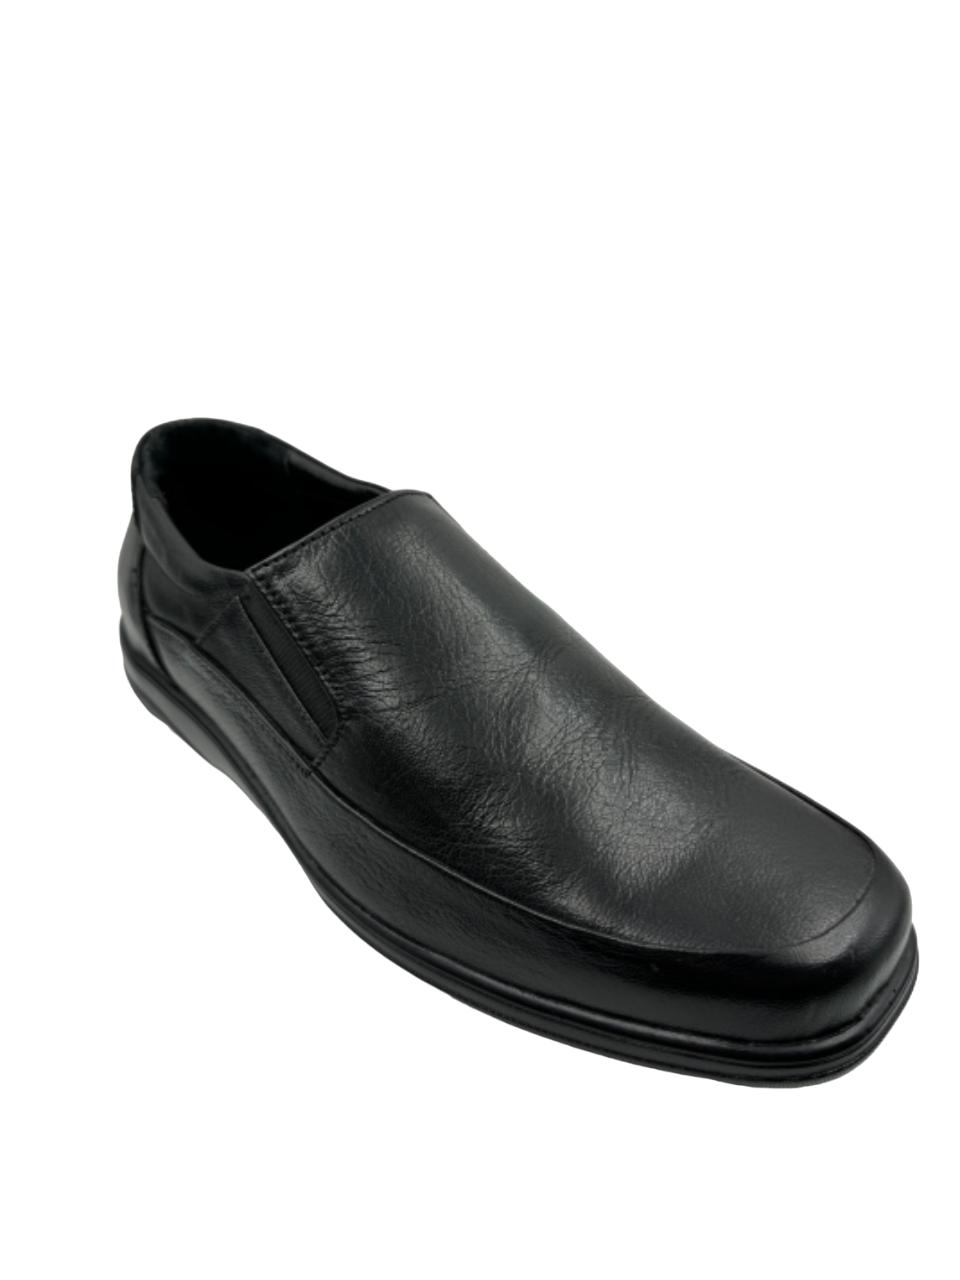 Ortho Soft Doctor Shoes GTSS 06